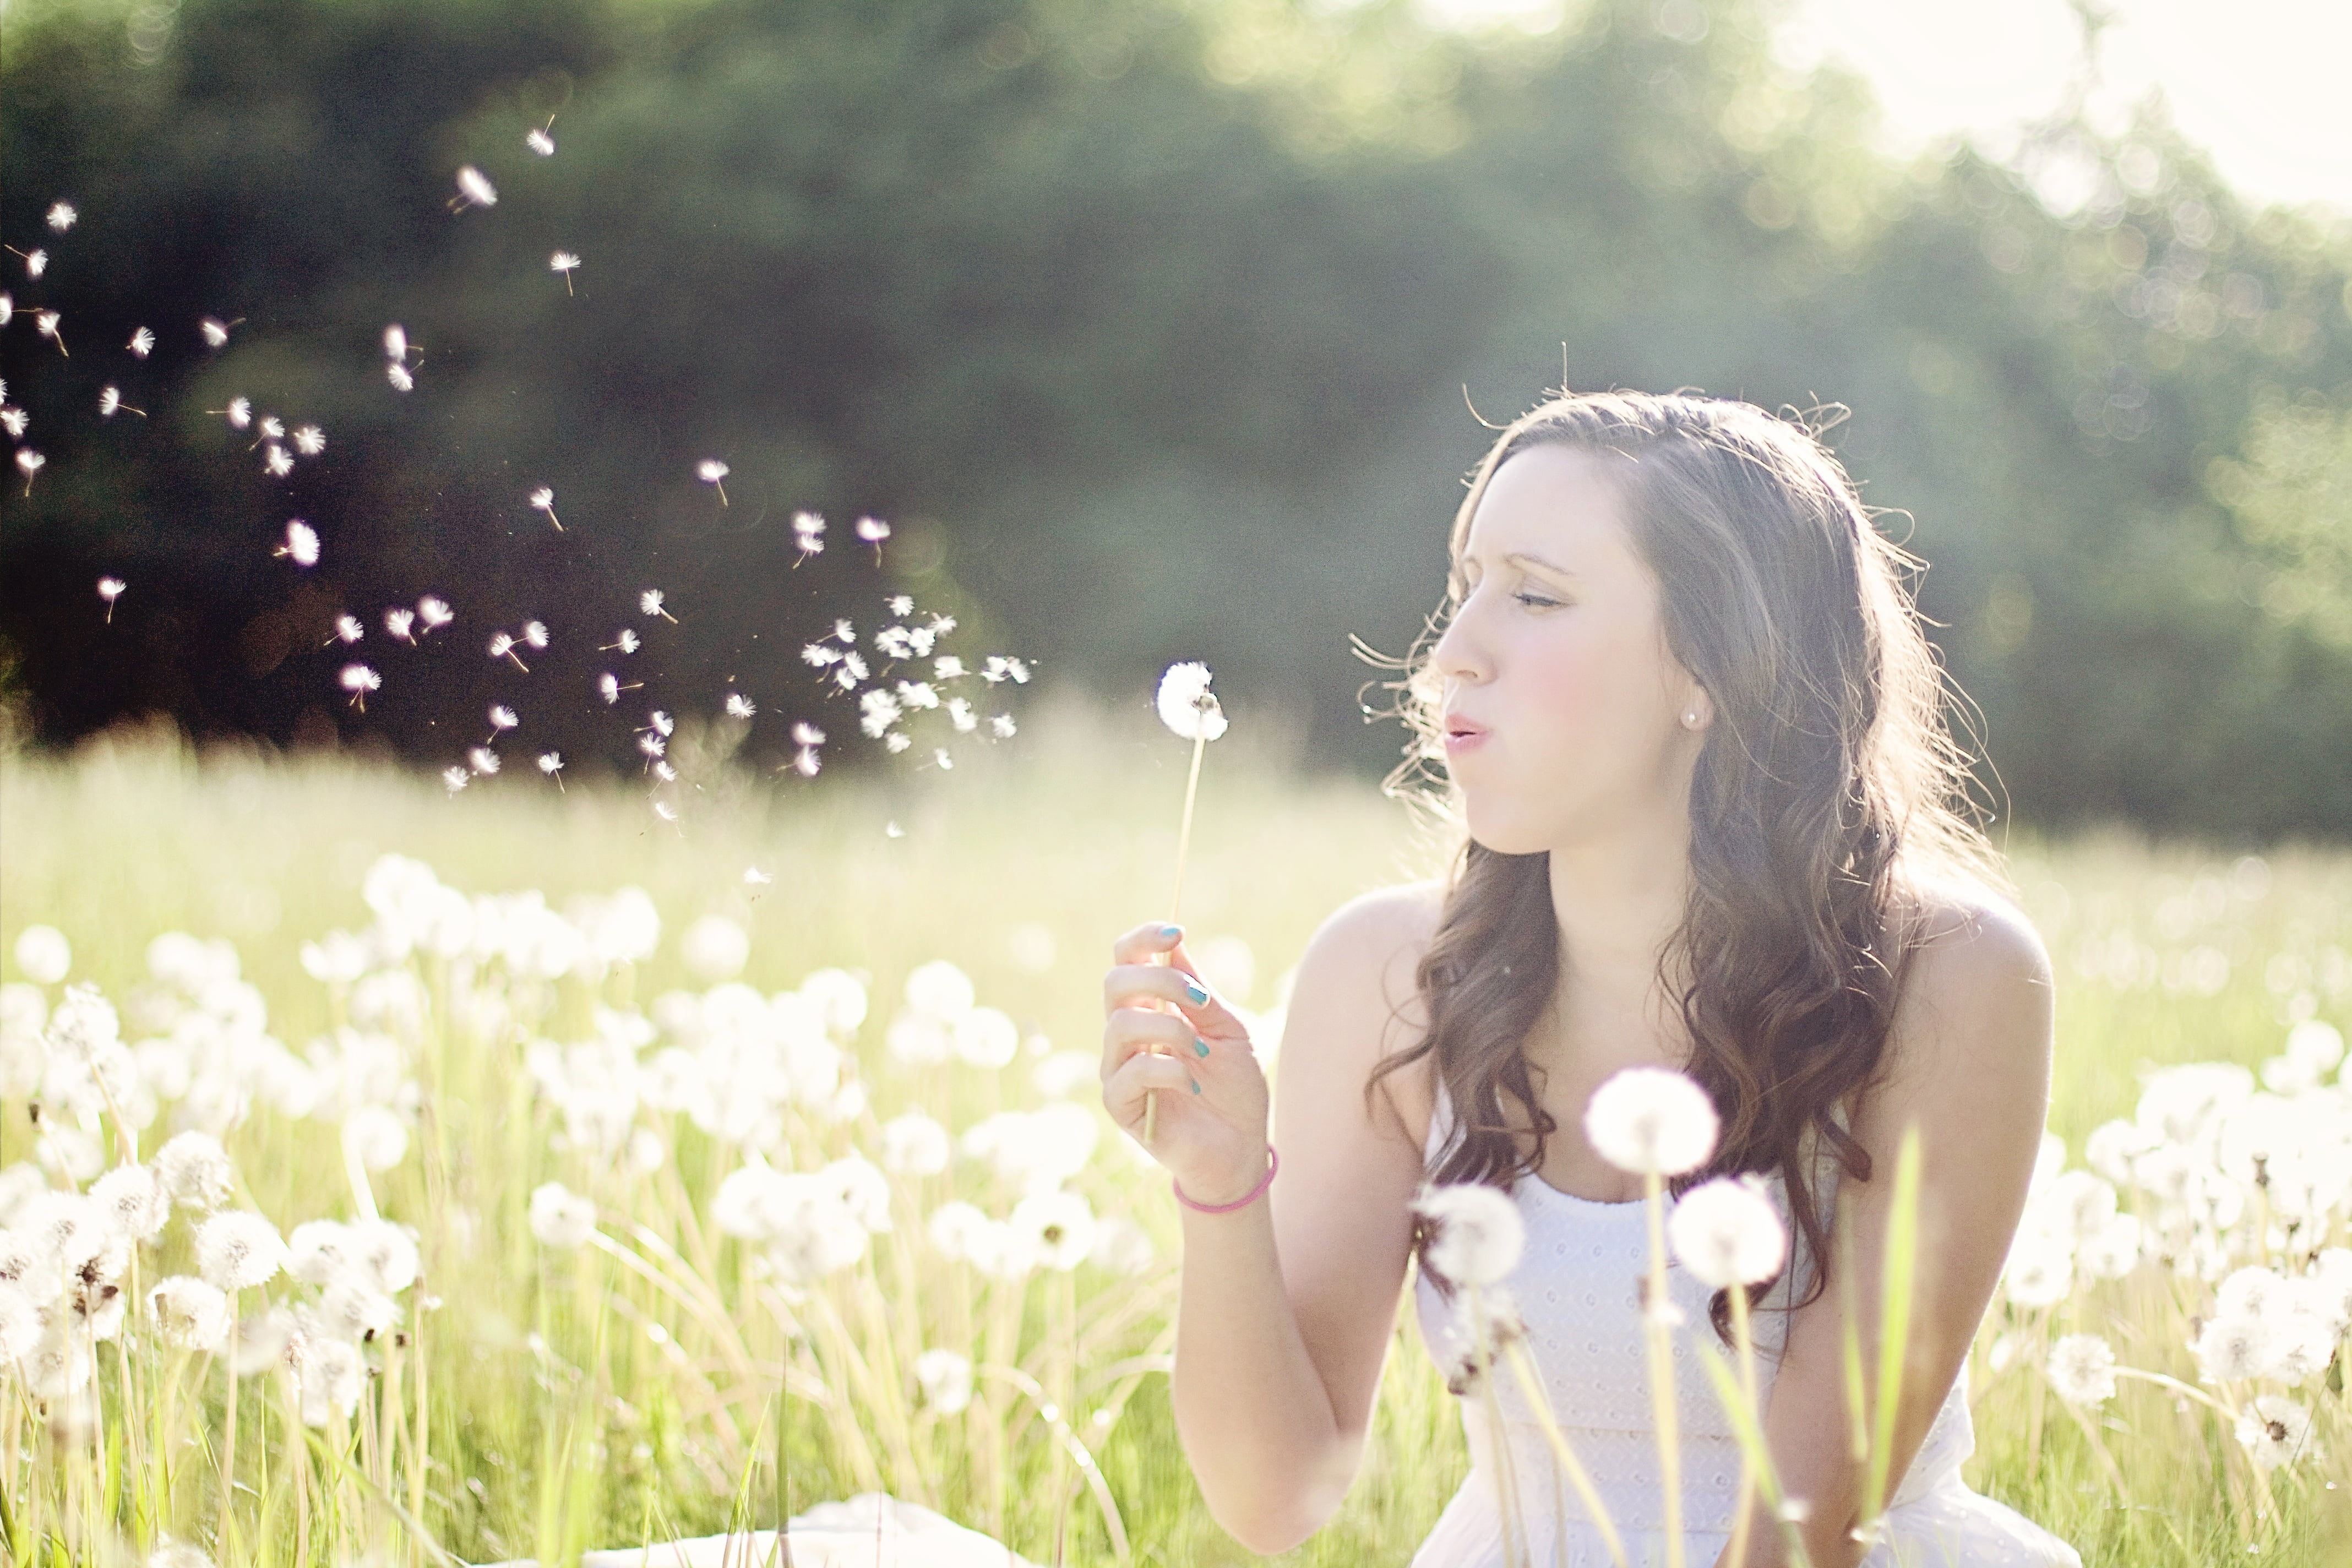 Woman in white sleeveless top blowing dandelion during daytime HD ...